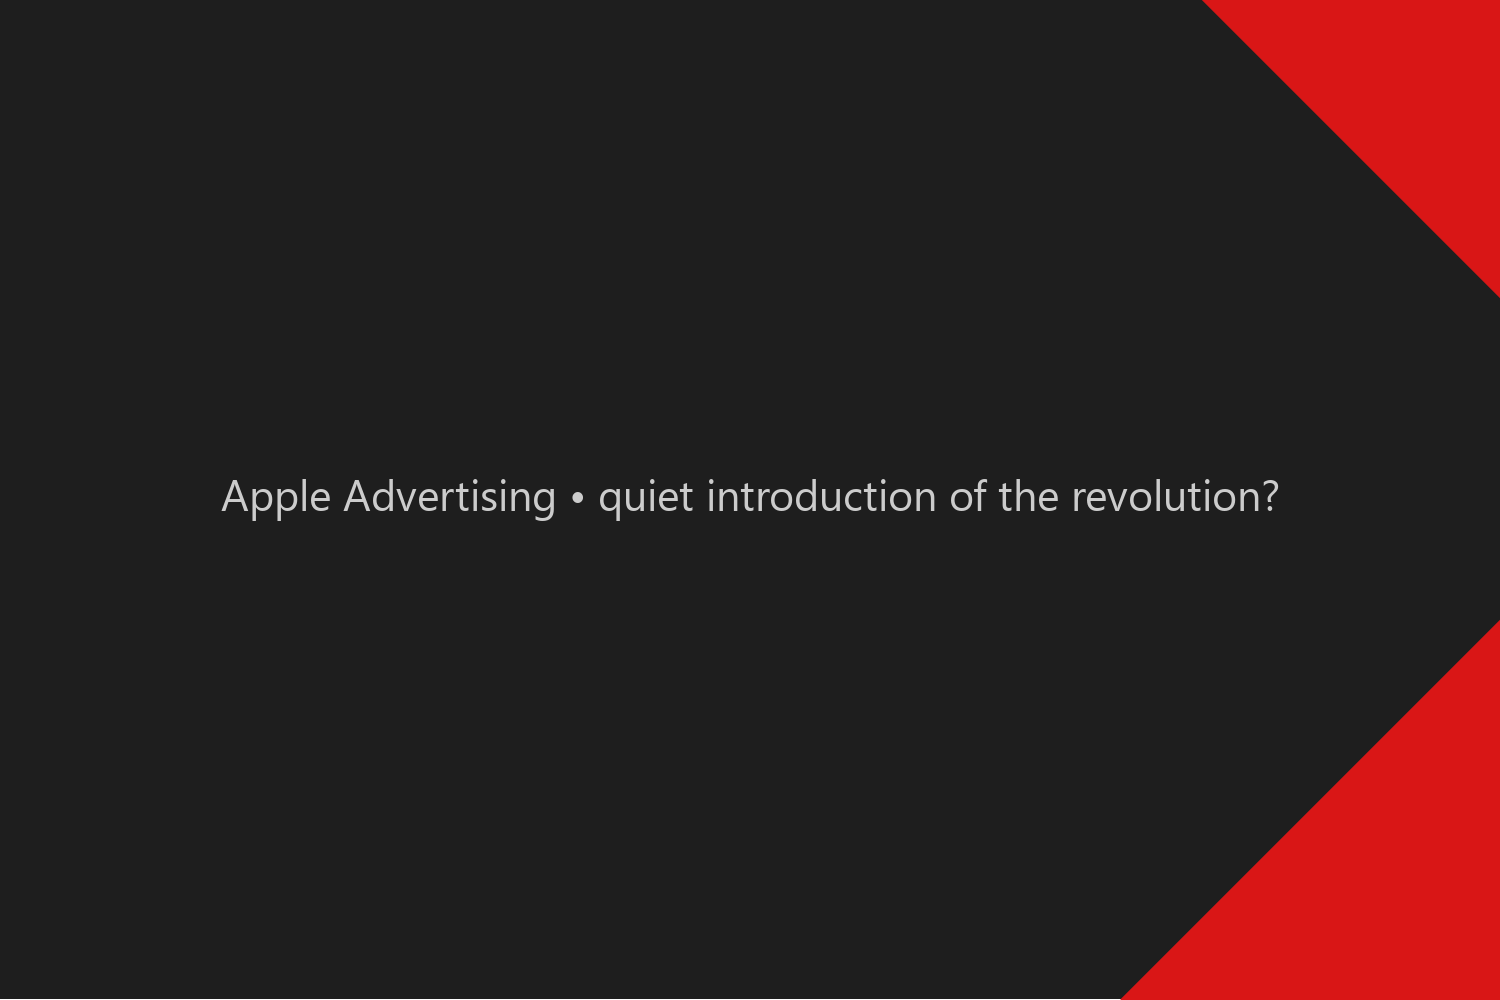 Apple Advertising • quiet introduction of the revolution?